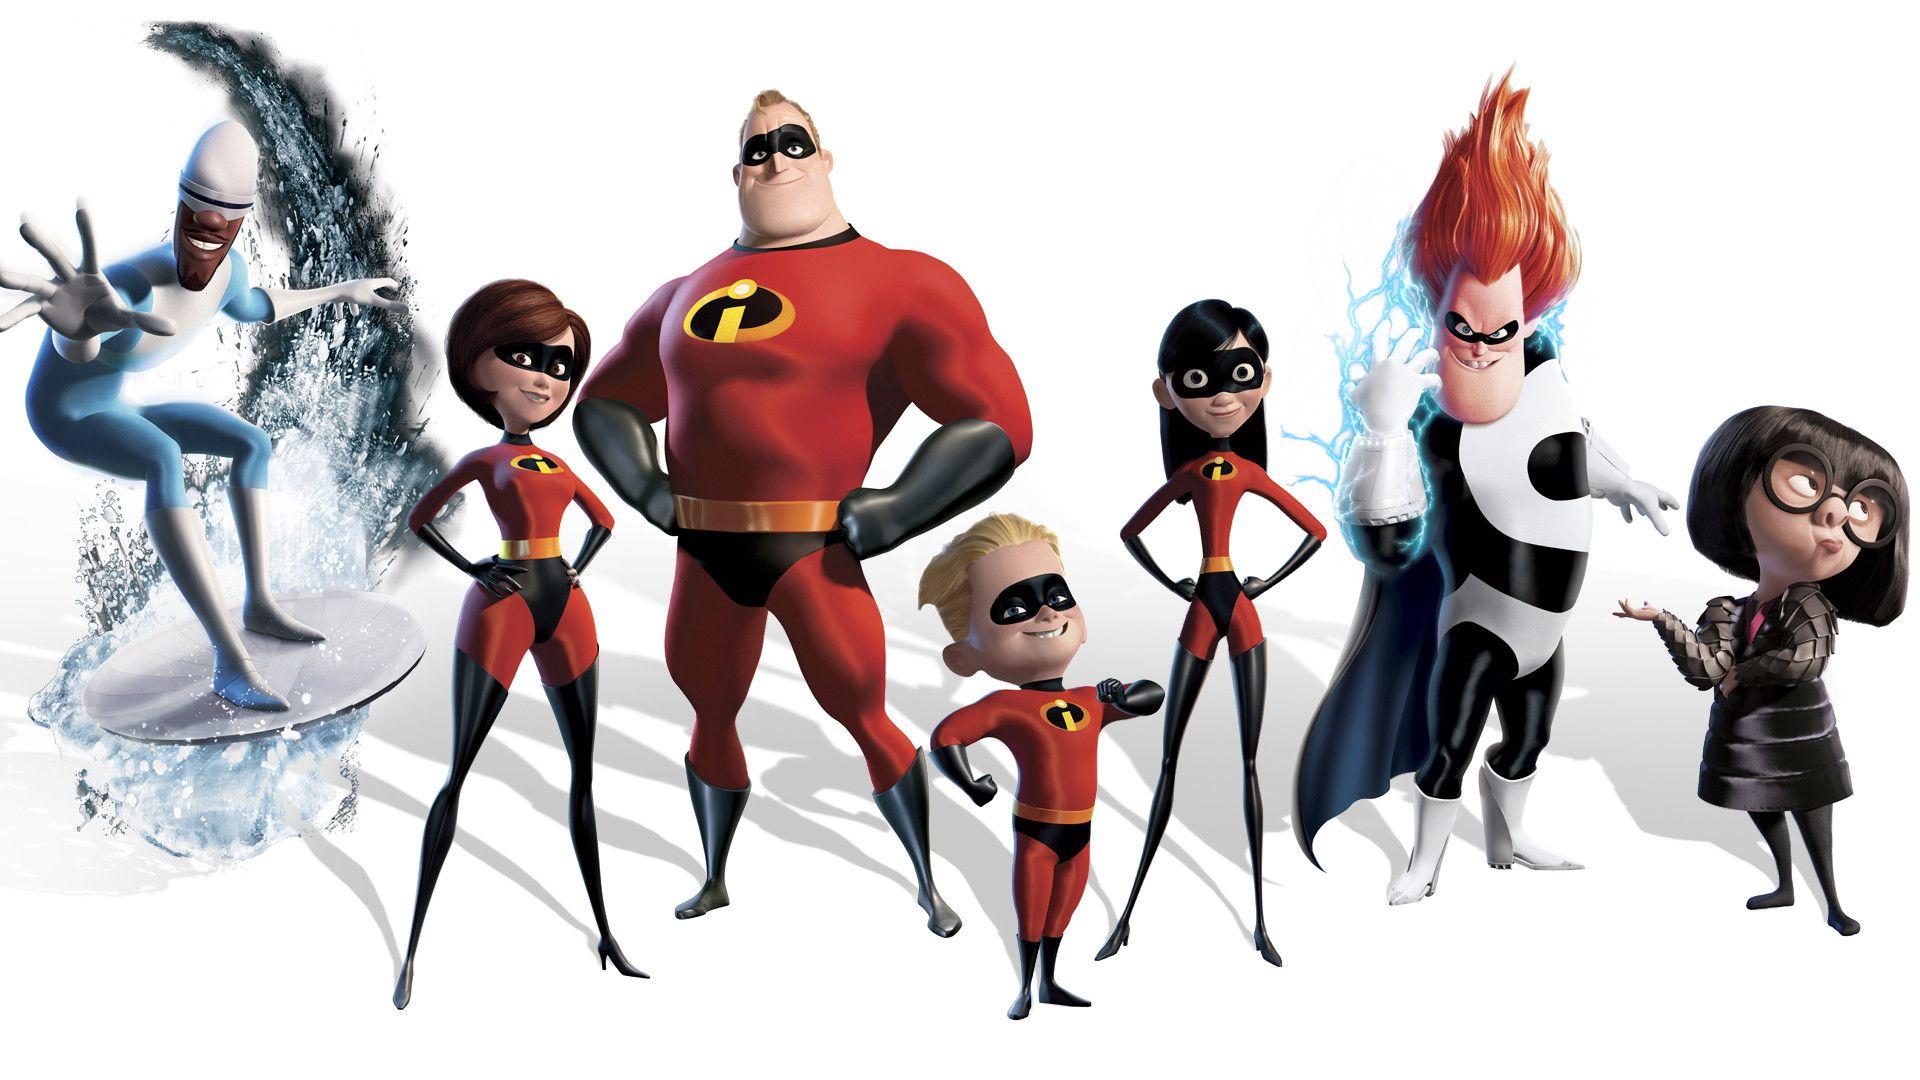 The Incredibles Cartoon HD Image Wallpaper for iPhone 6